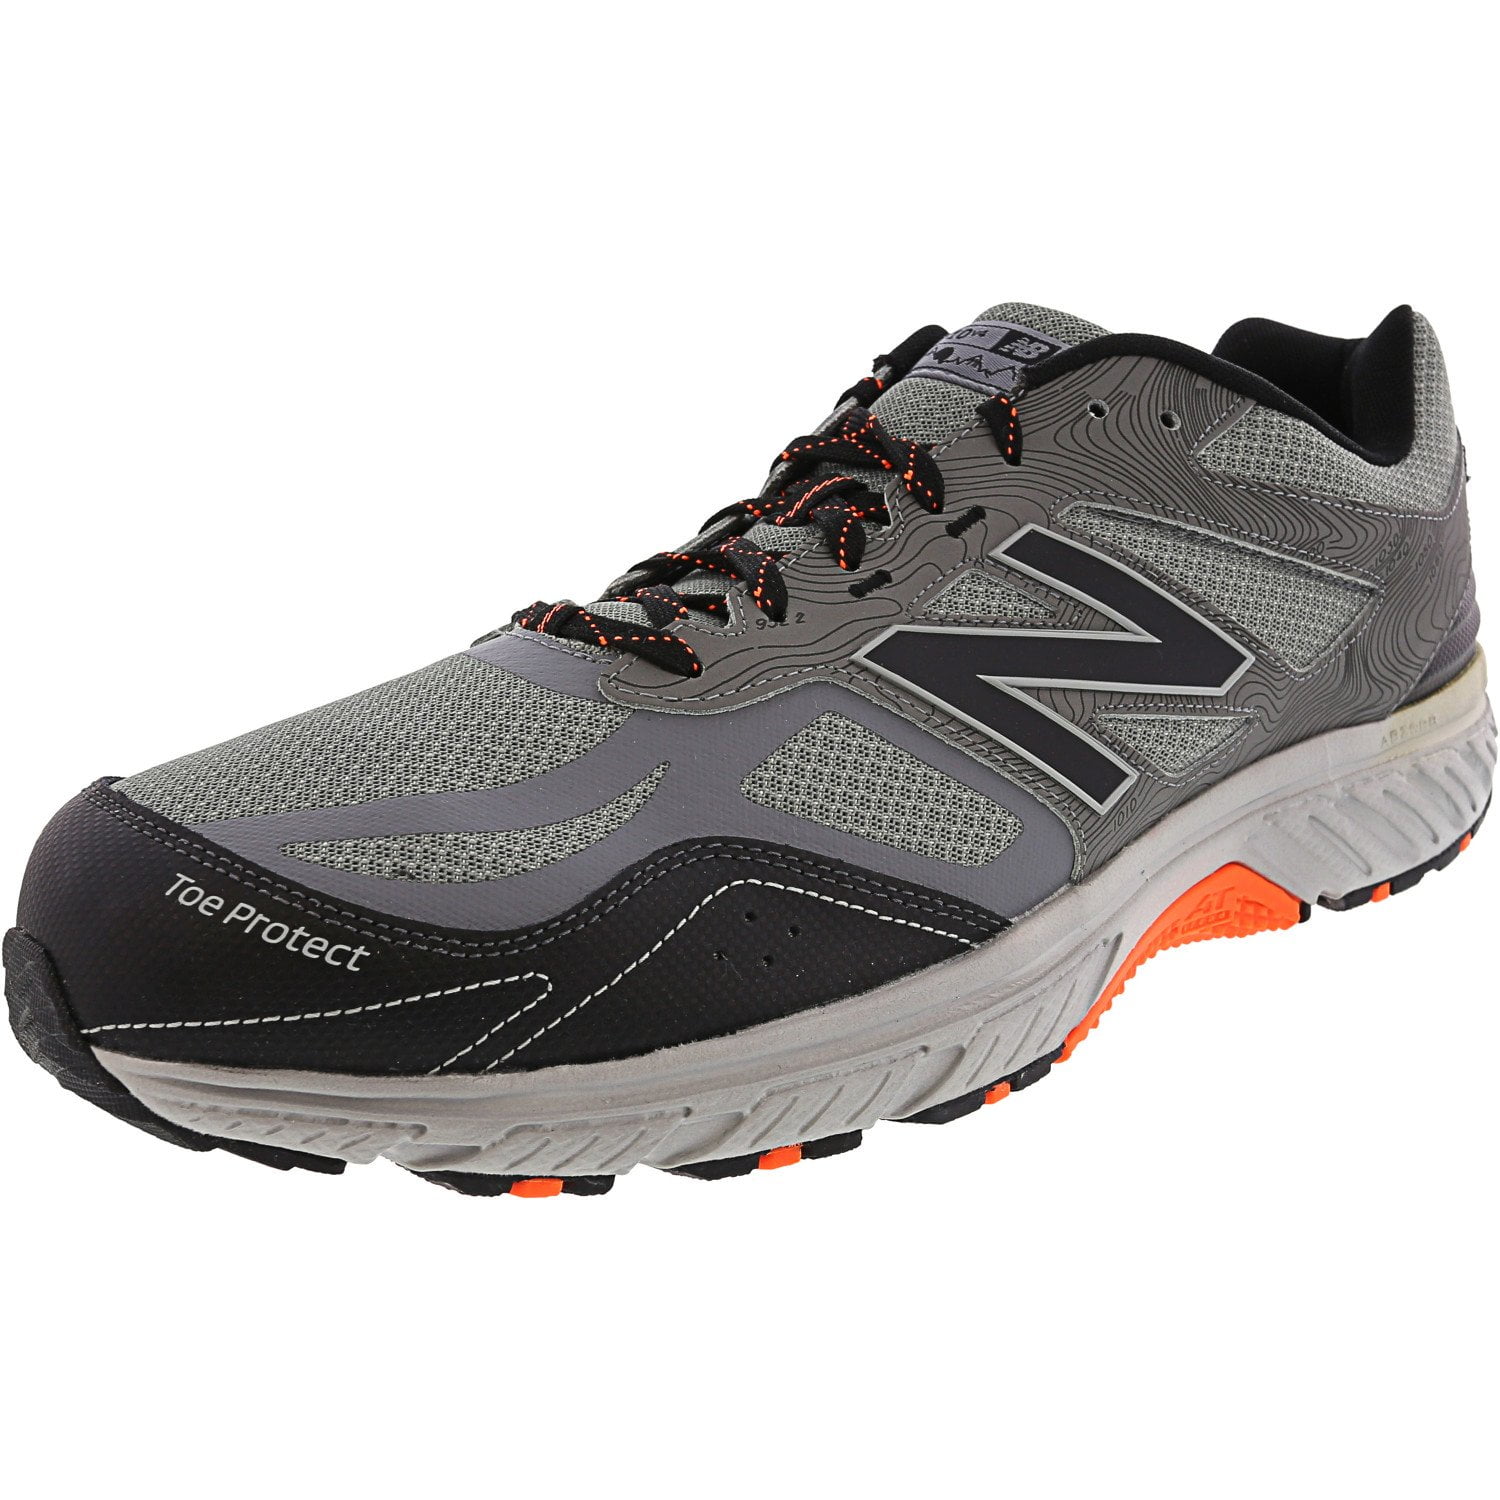 New Balance Mt510 Trail Runner Sneakers 